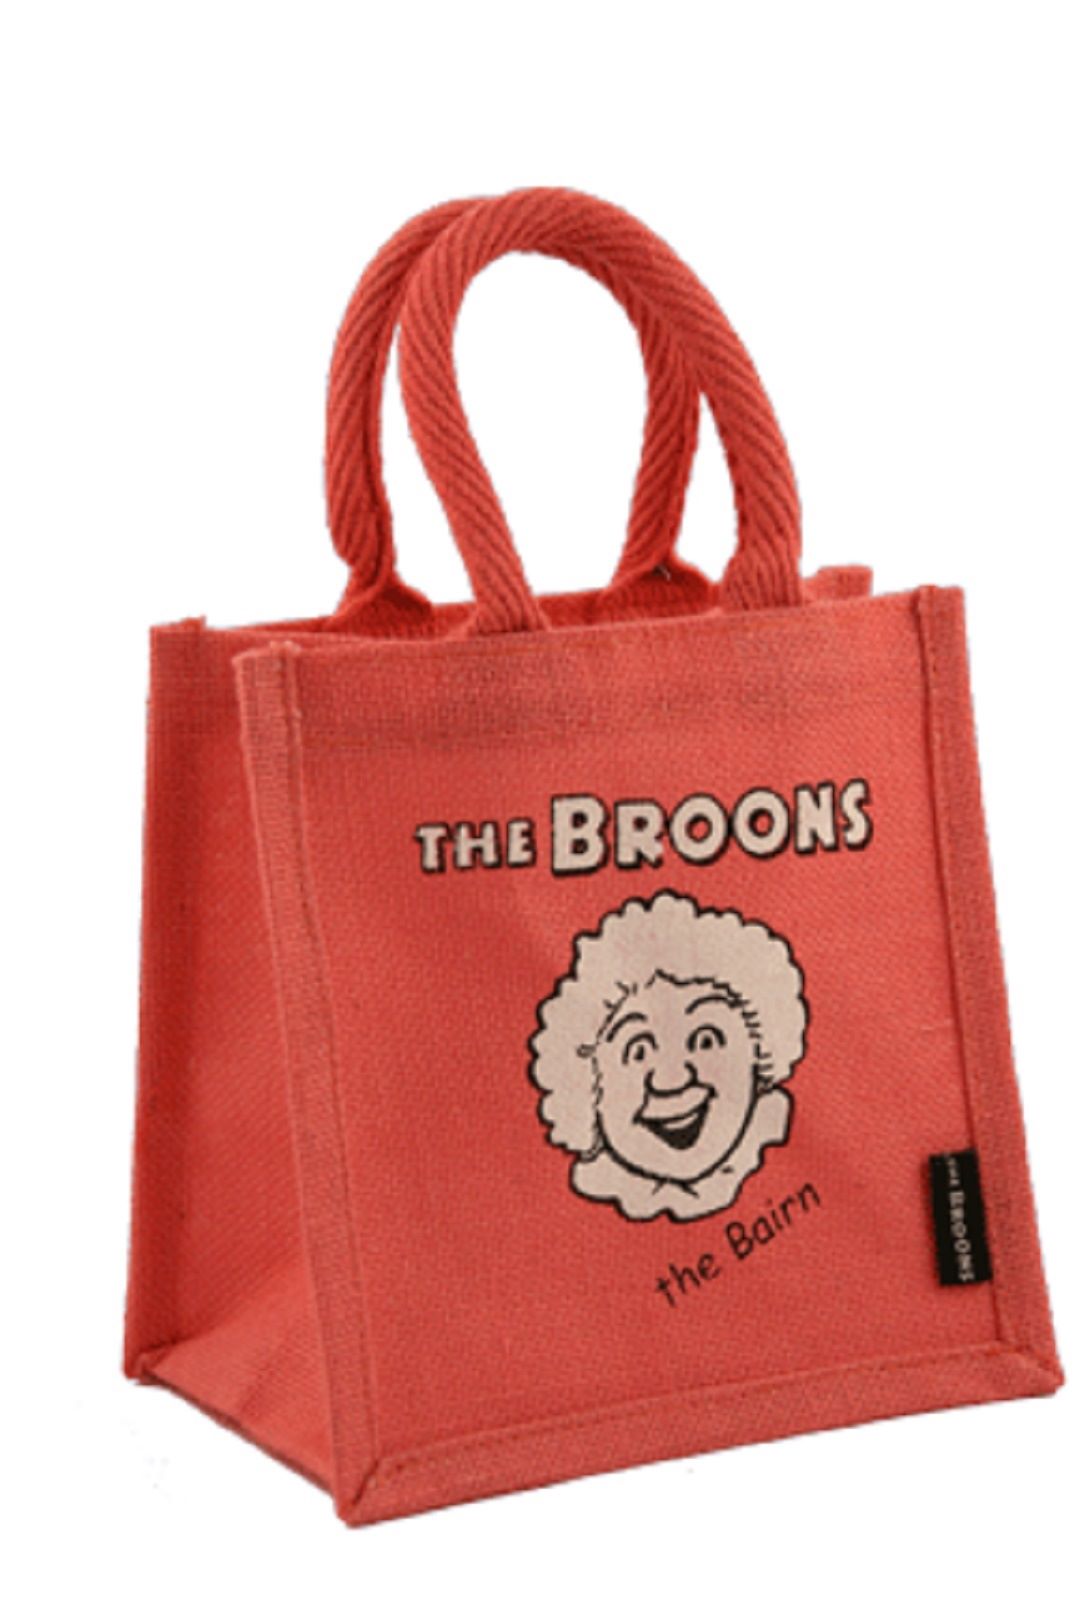 The Bairn Face - Cute Small Shopping Bag - Gift Bag - The Broons - Pink